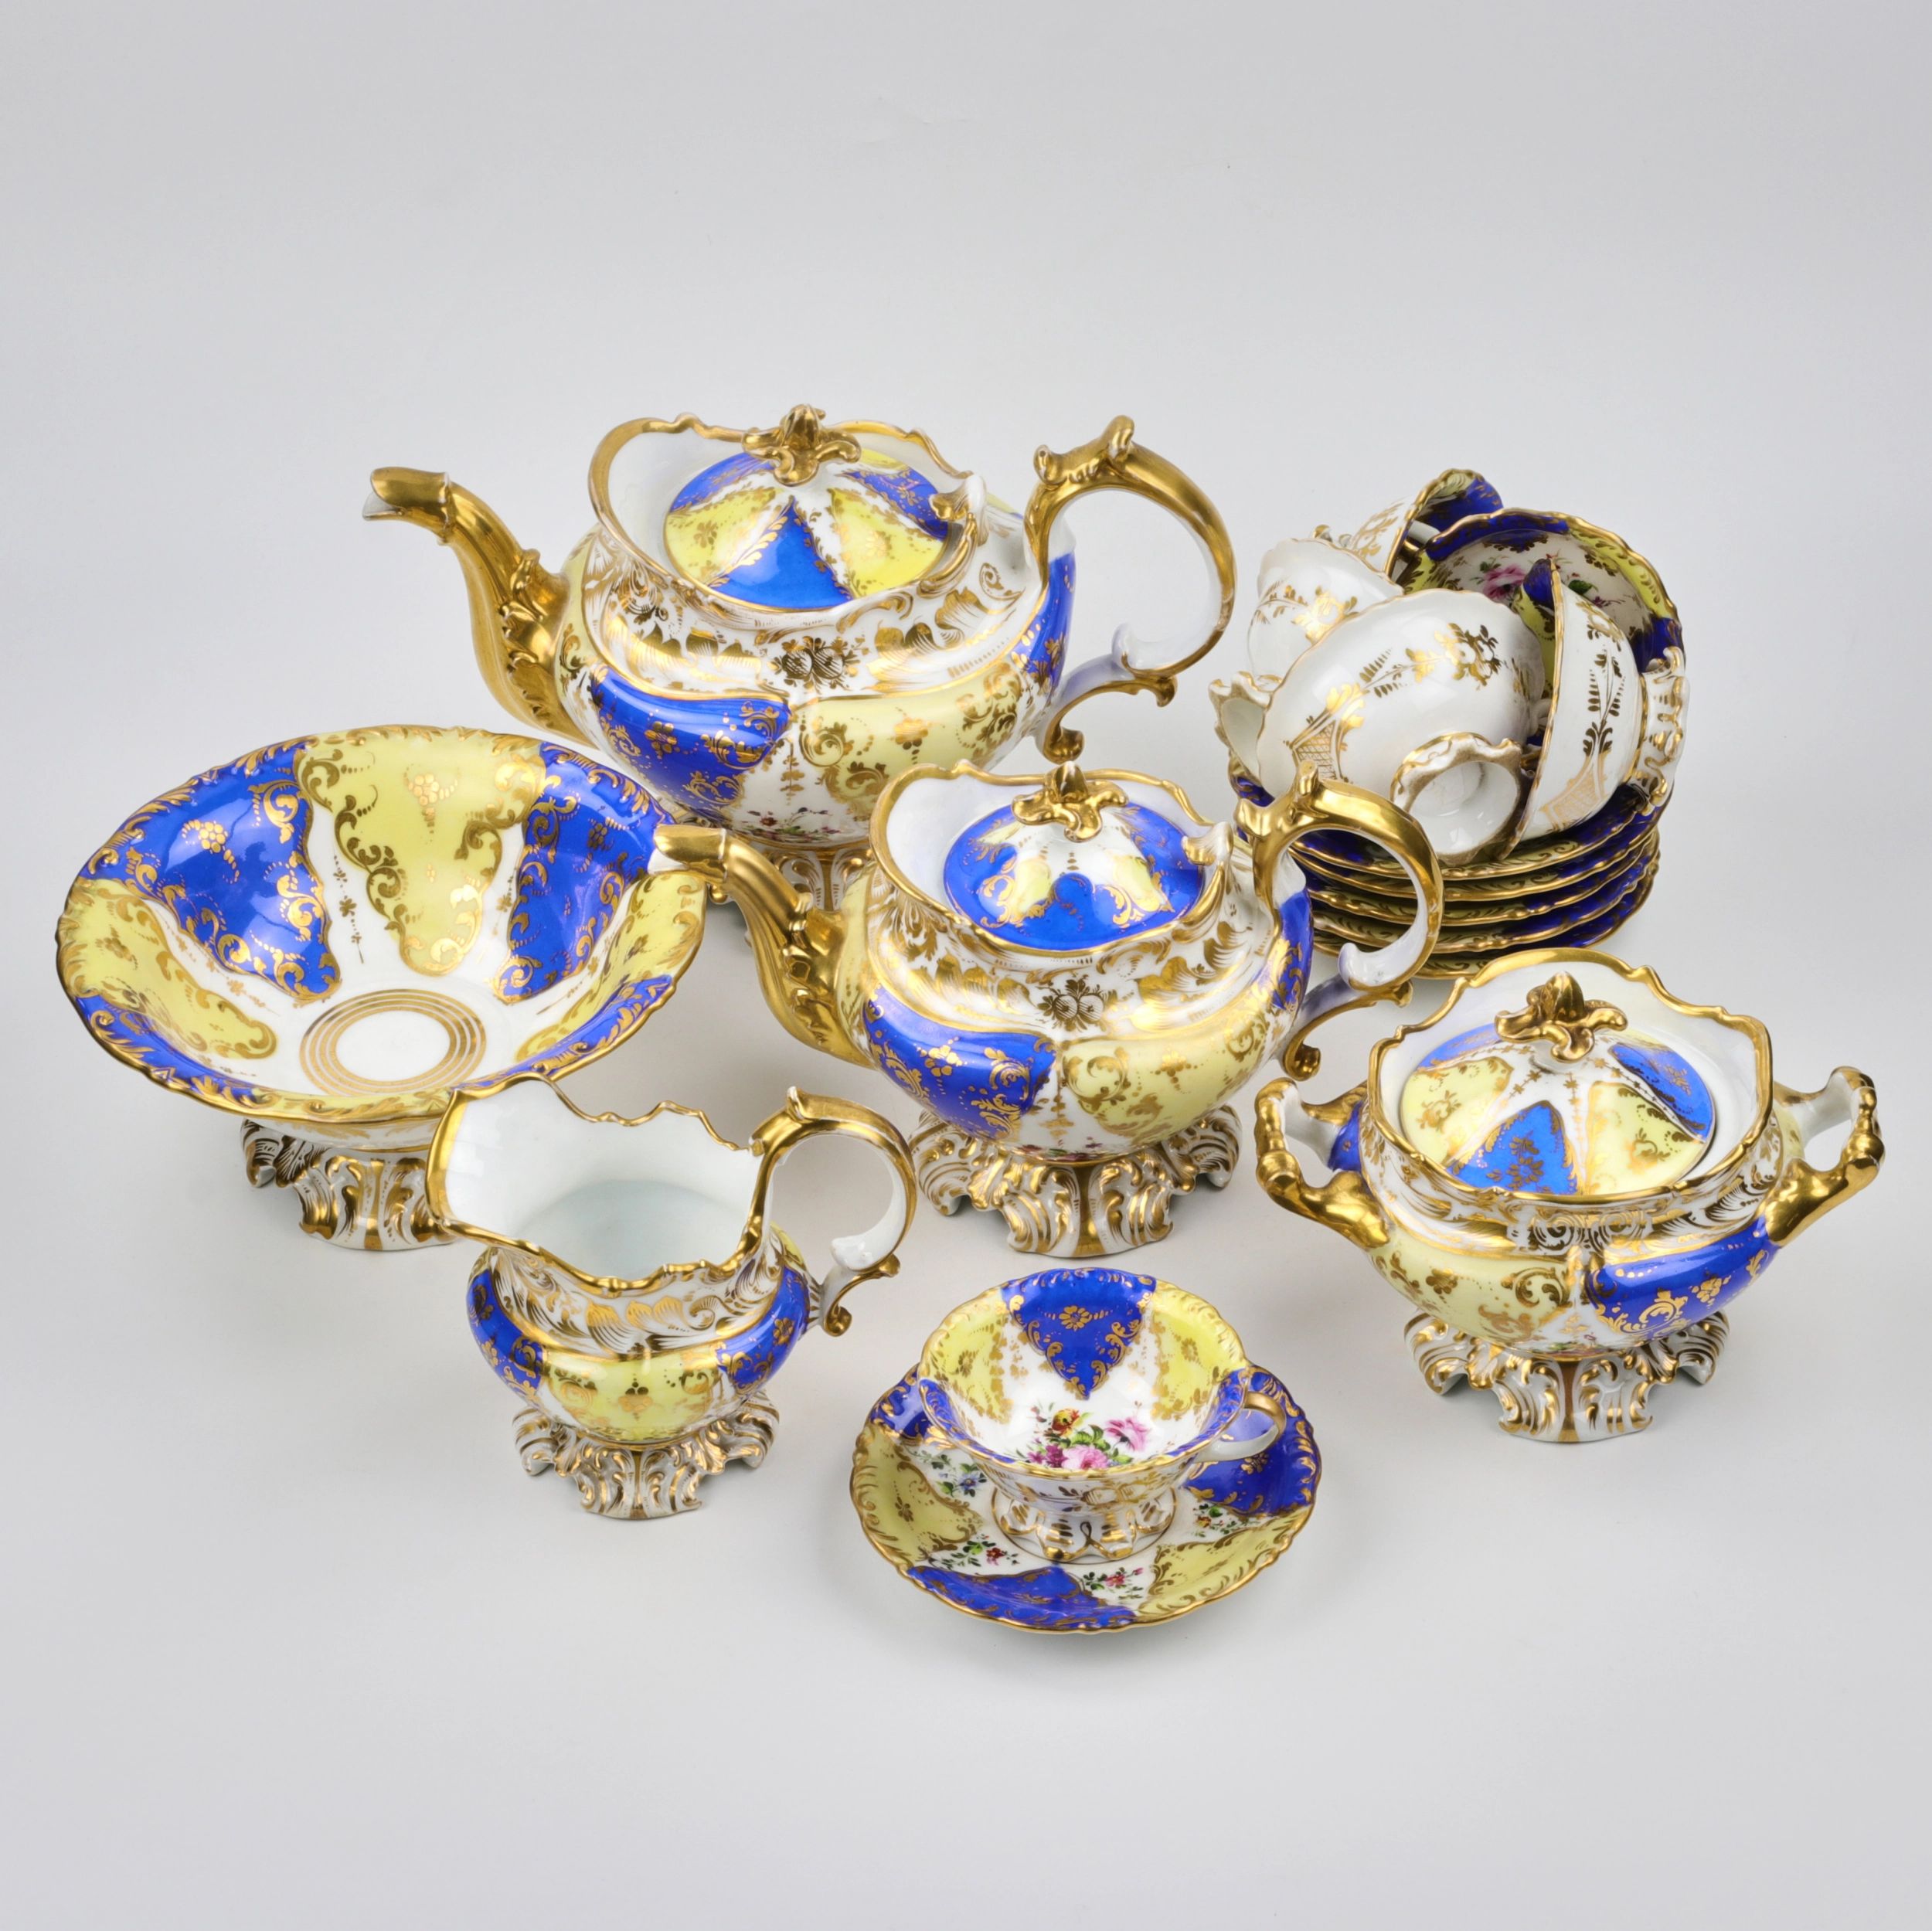 Tea set of the second baroque. - Image 2 of 5